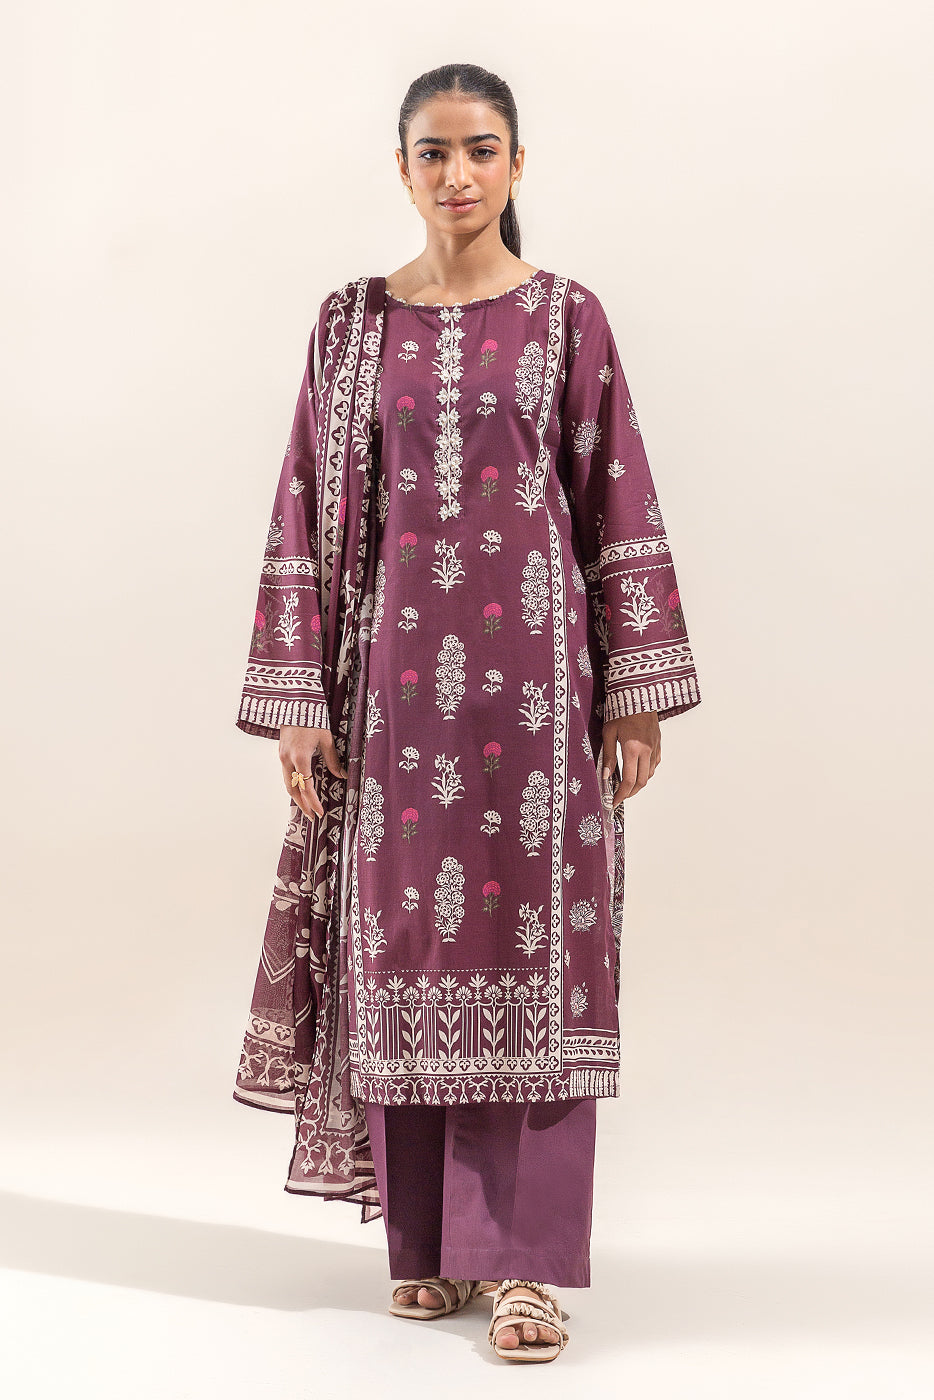 3 PIECE PRINTED LAWN SUIT-RED DAHLIA (UNSTITCHED)